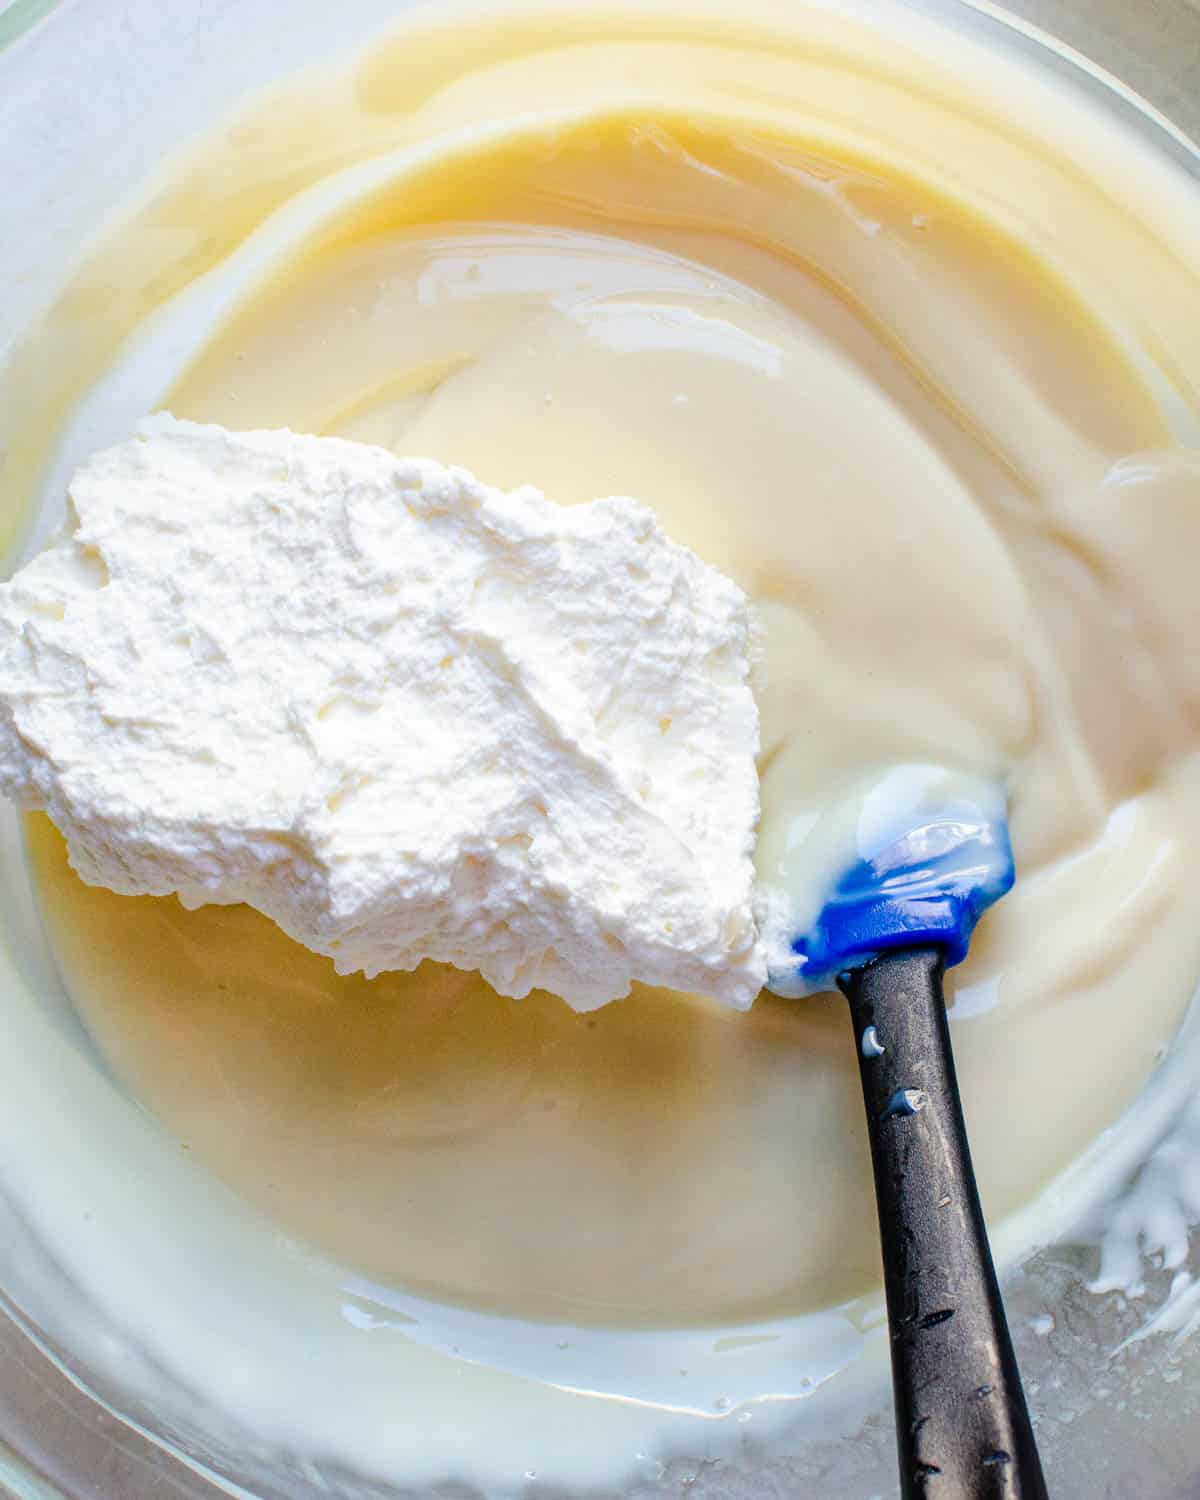 Fold the stabilized whipped cream into the custard.